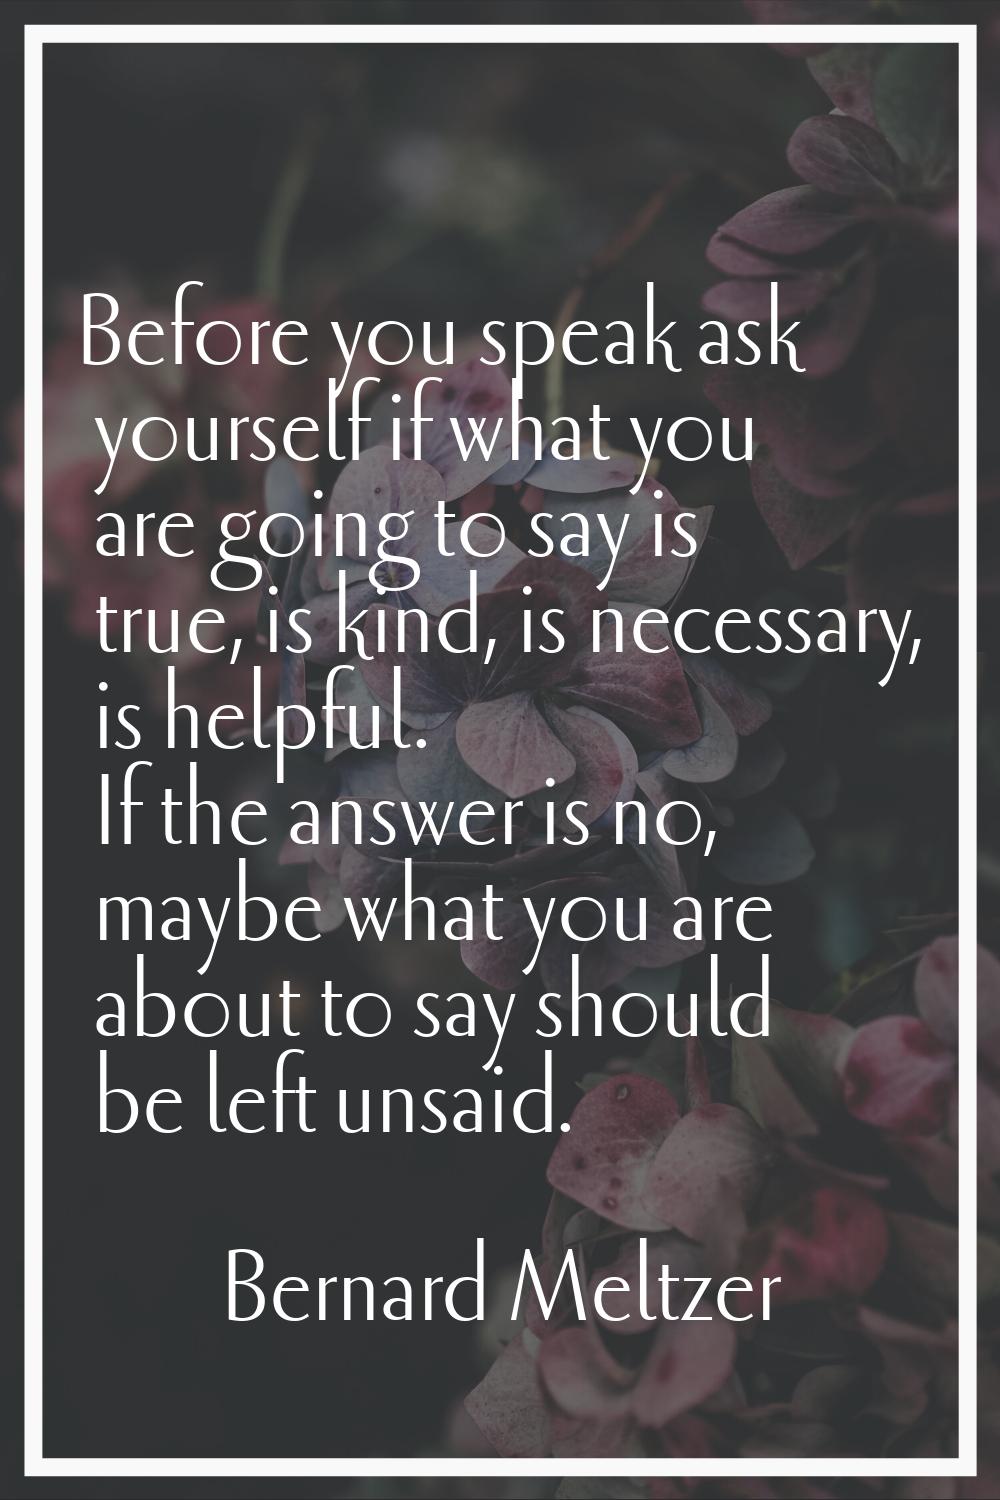 Before you speak ask yourself if what you are going to say is true, is kind, is necessary, is helpf